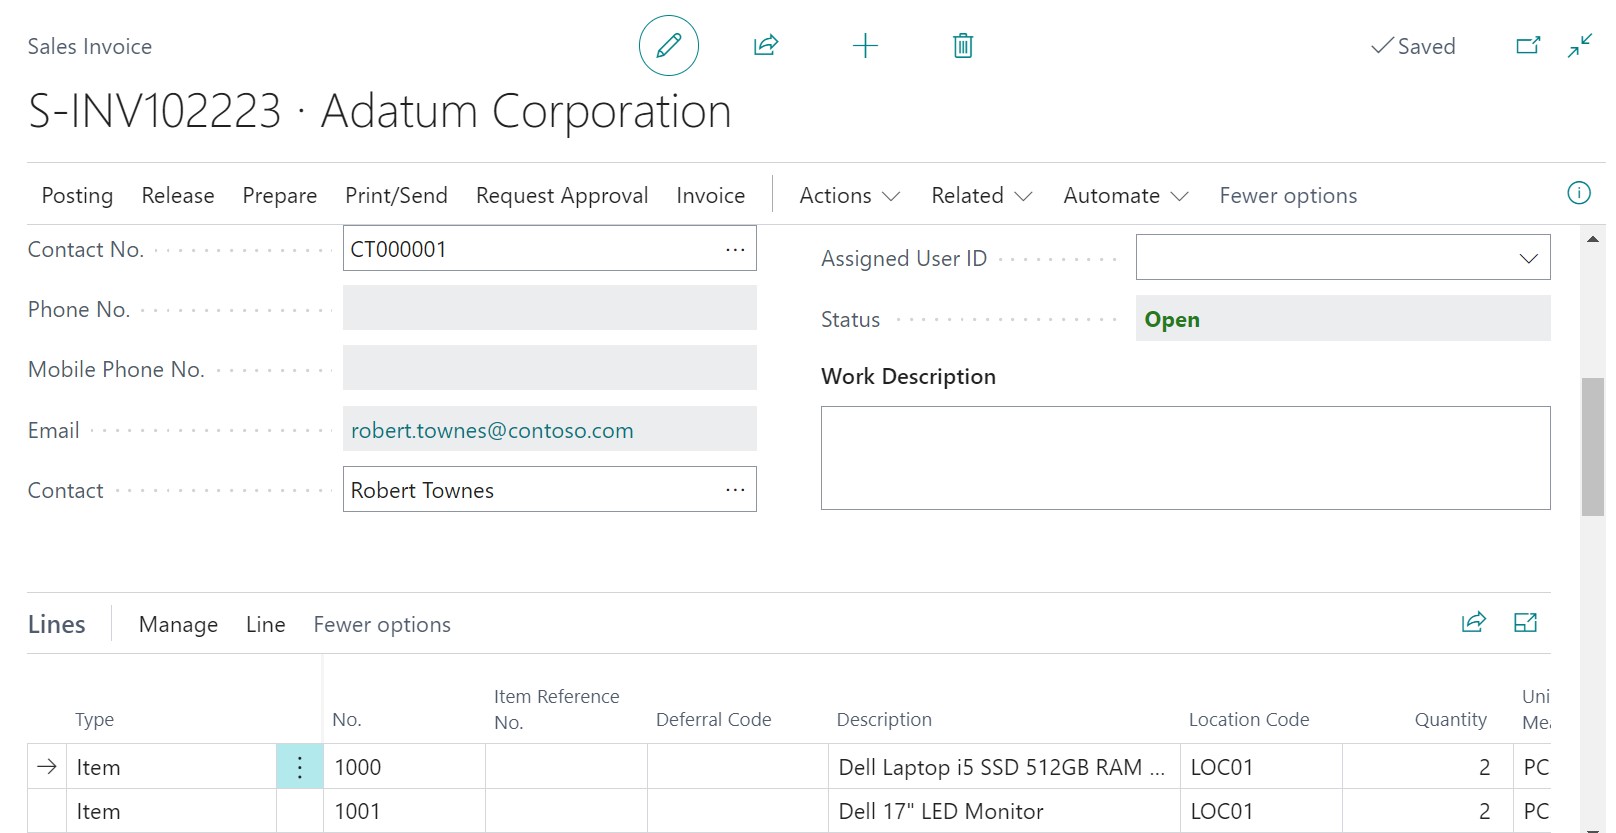 Business Functionality Supported by Dynamics 365 Business Central - Sales